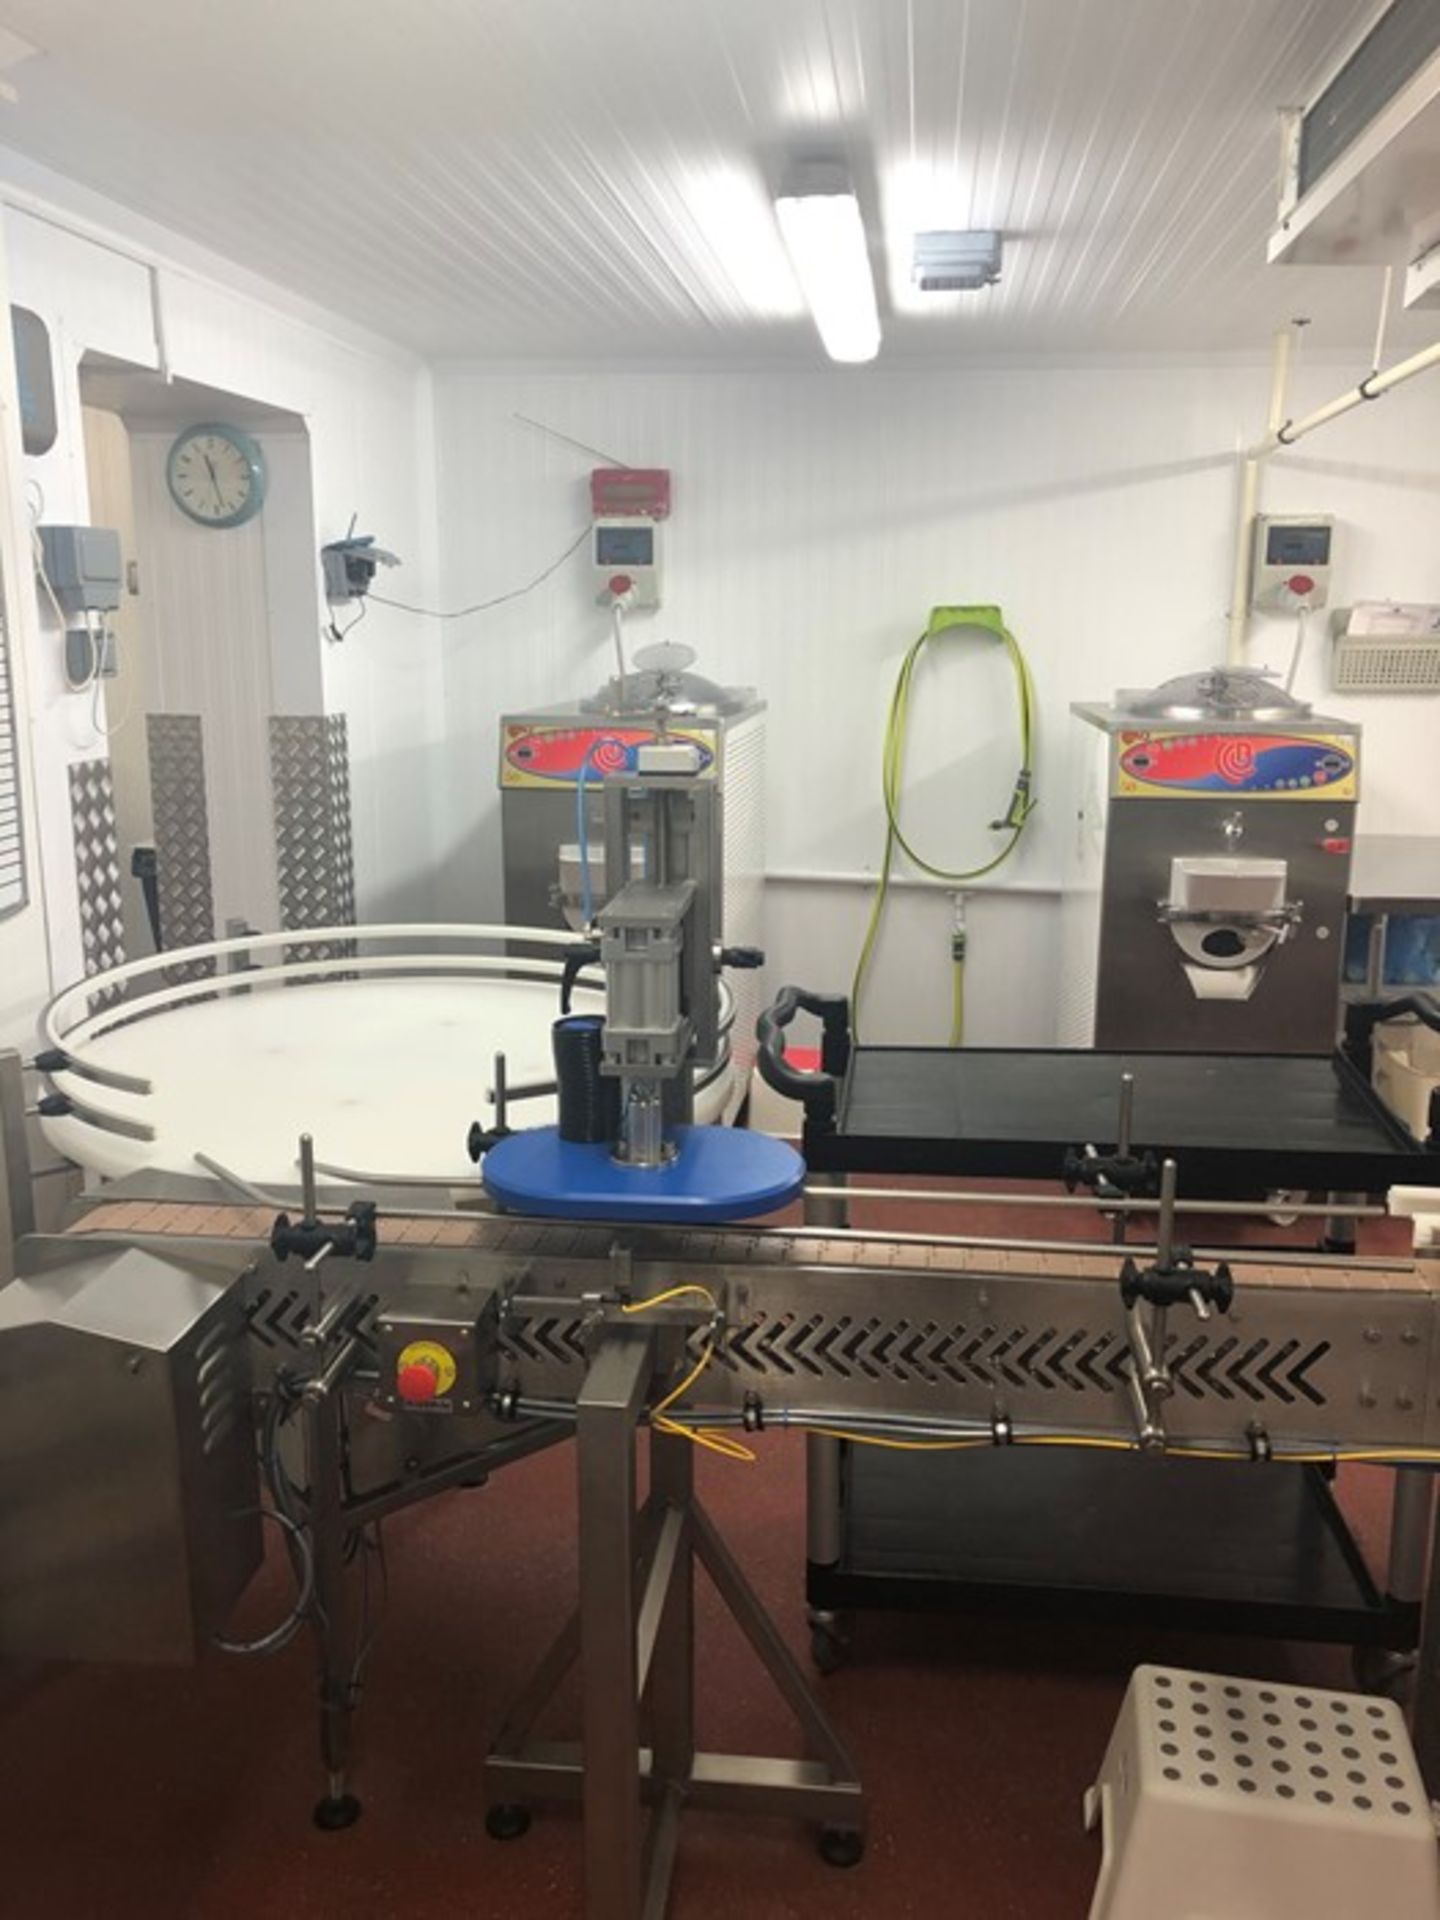 2019 RIGGS AUTOPACK FILLING LINE - Image 5 of 6